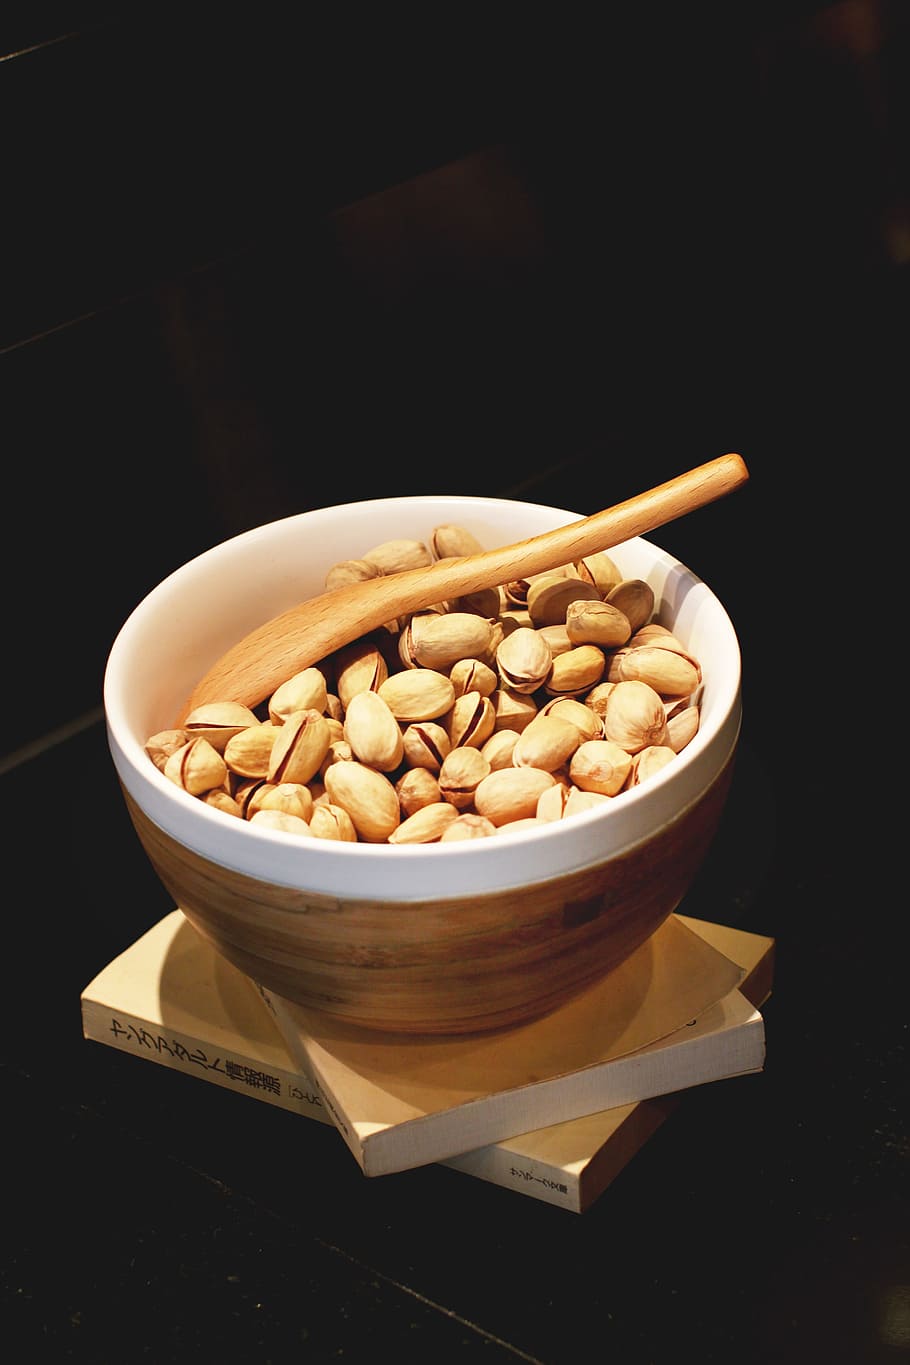 pistachio, boel, nut, nuts, spoon, food and drink, food, still life, bowl, freshness